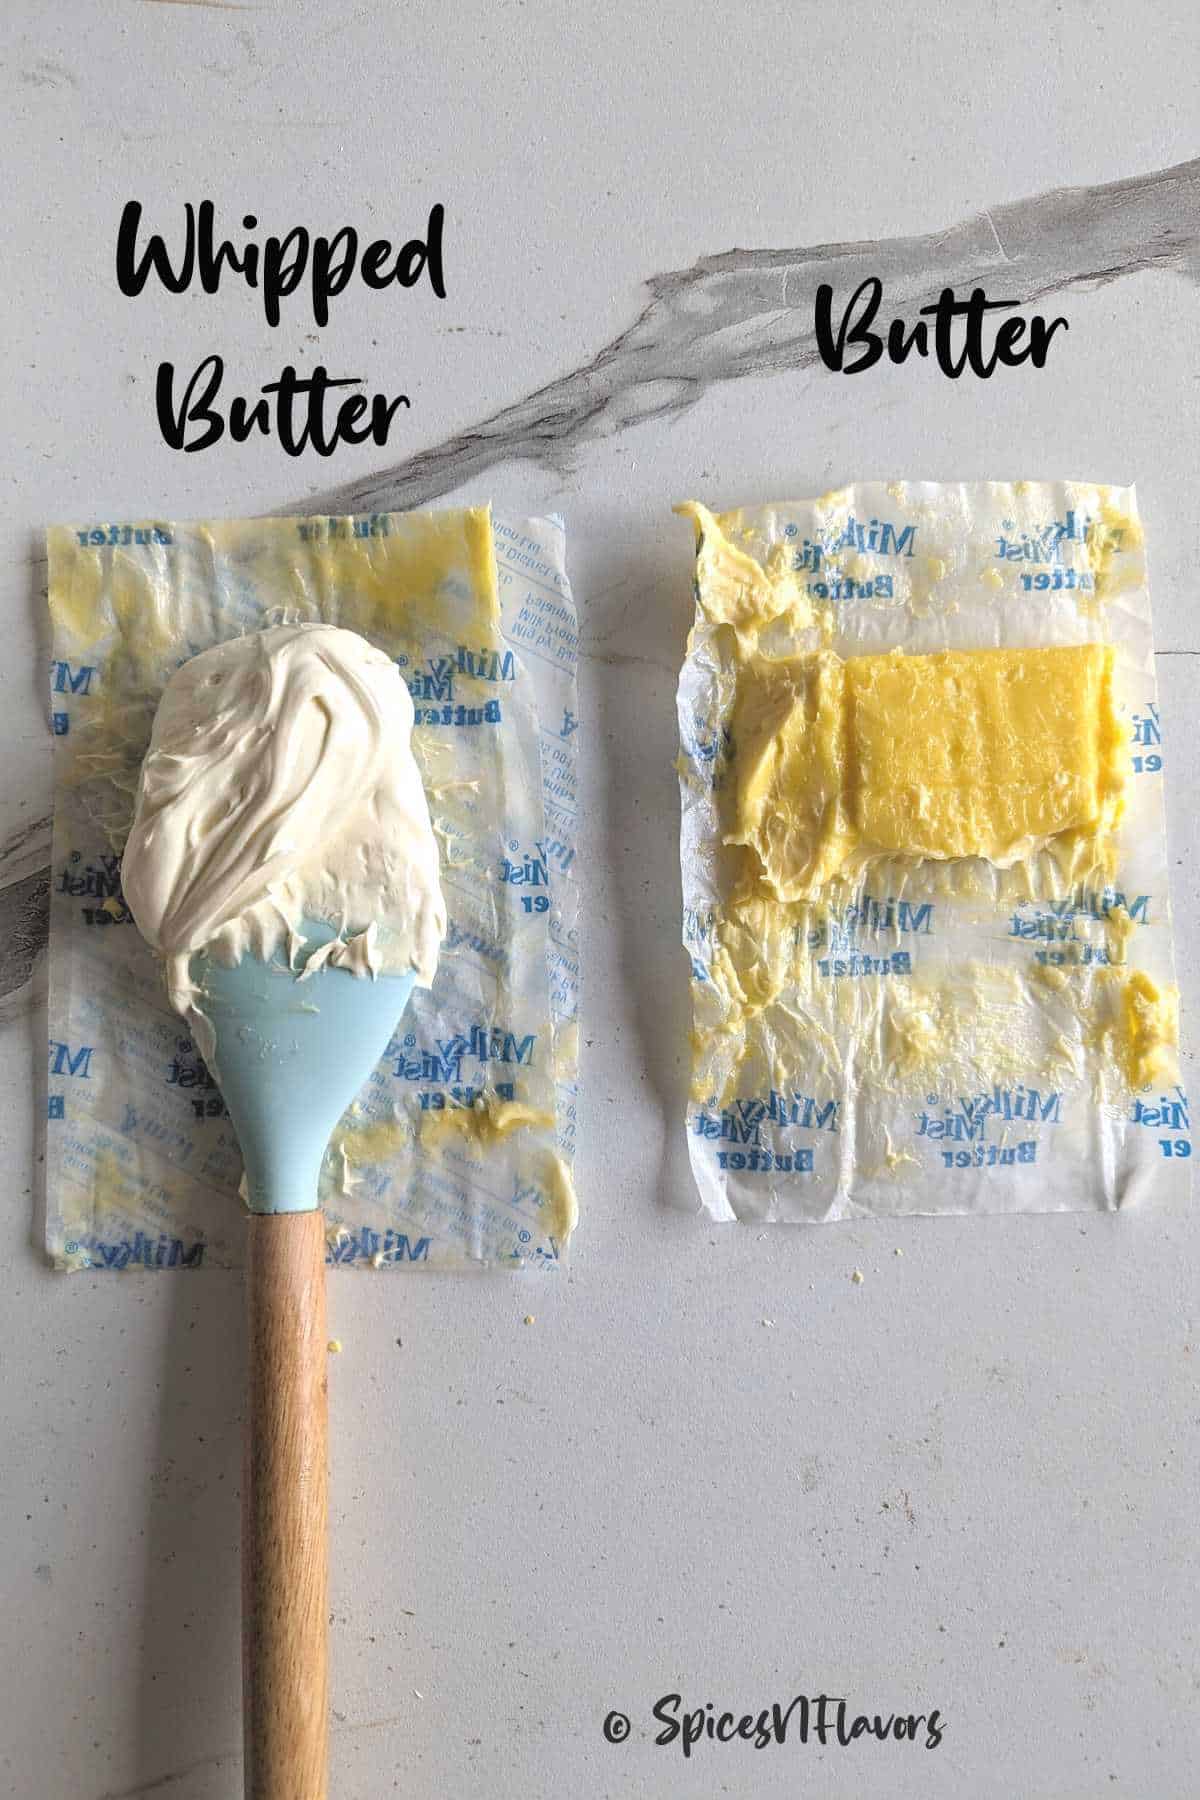 comparison between whipped butter and regular butter to show the difference between two